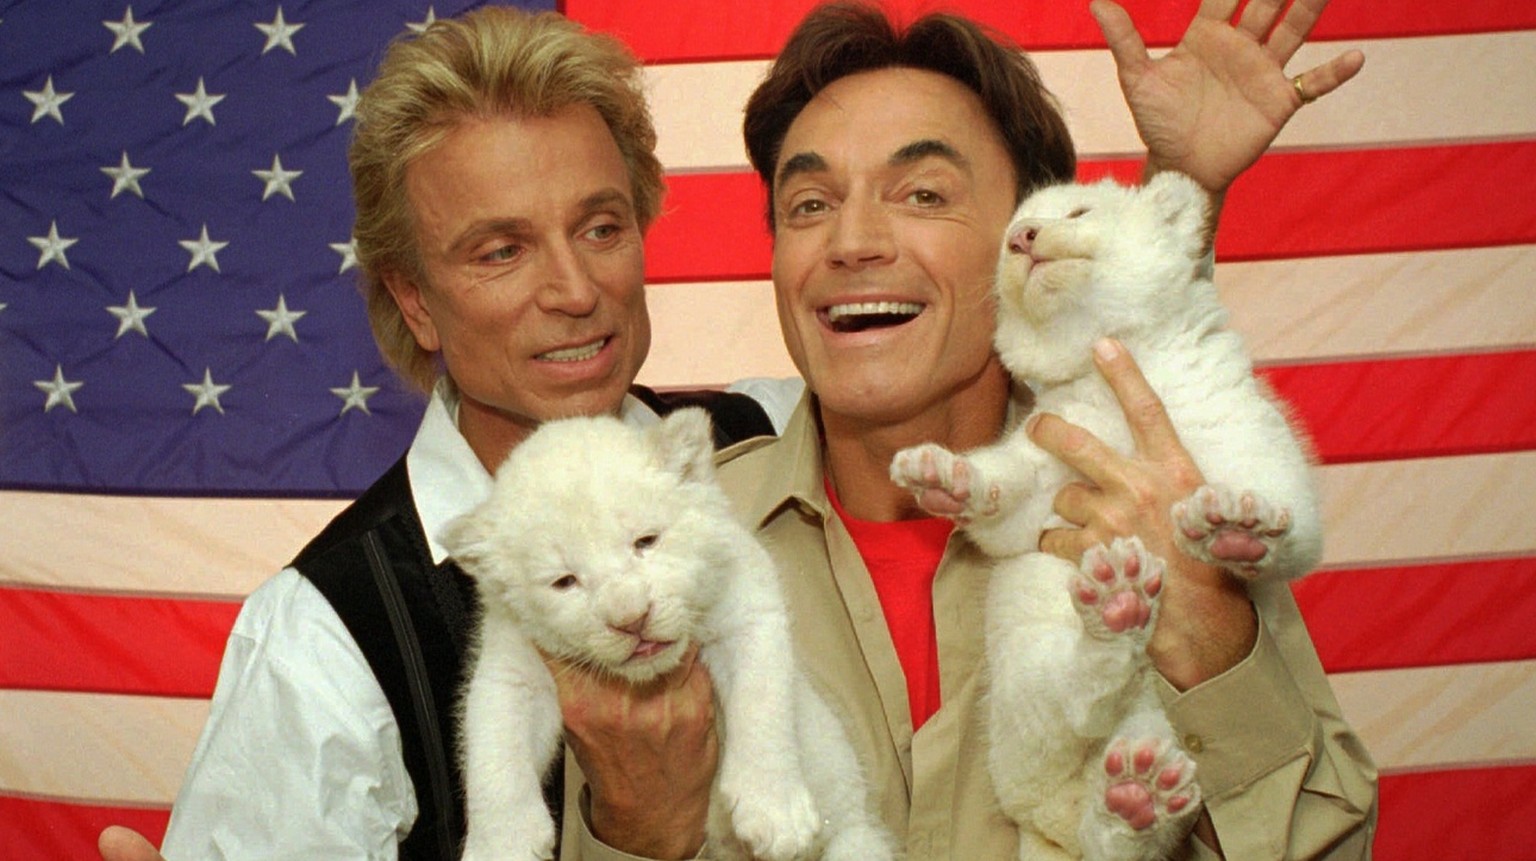 Two rare, 18-day-old white lion cubs squirm their way through a photo session with their new American hosts, illusionists Siegfried, left, and Roy, Thursday, May 2, 1996, in Las Vegas. A tiger attacke ...